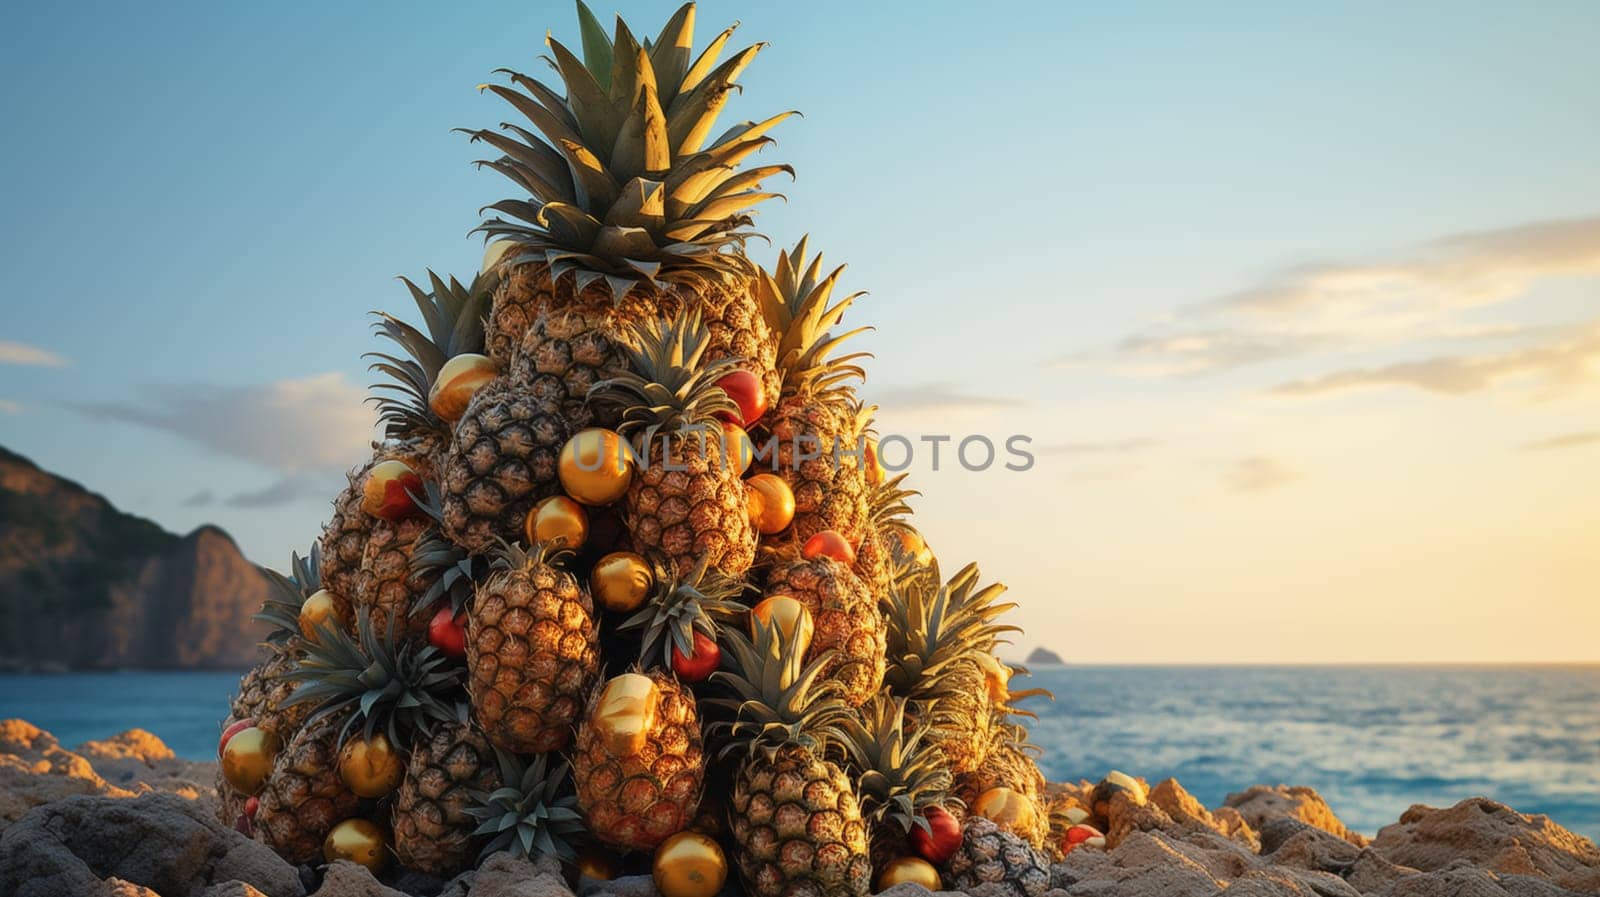 Pyramid of pineapples with golden balls standing on the sand on the beach at sunset. Tropical Christmas concept on the beach